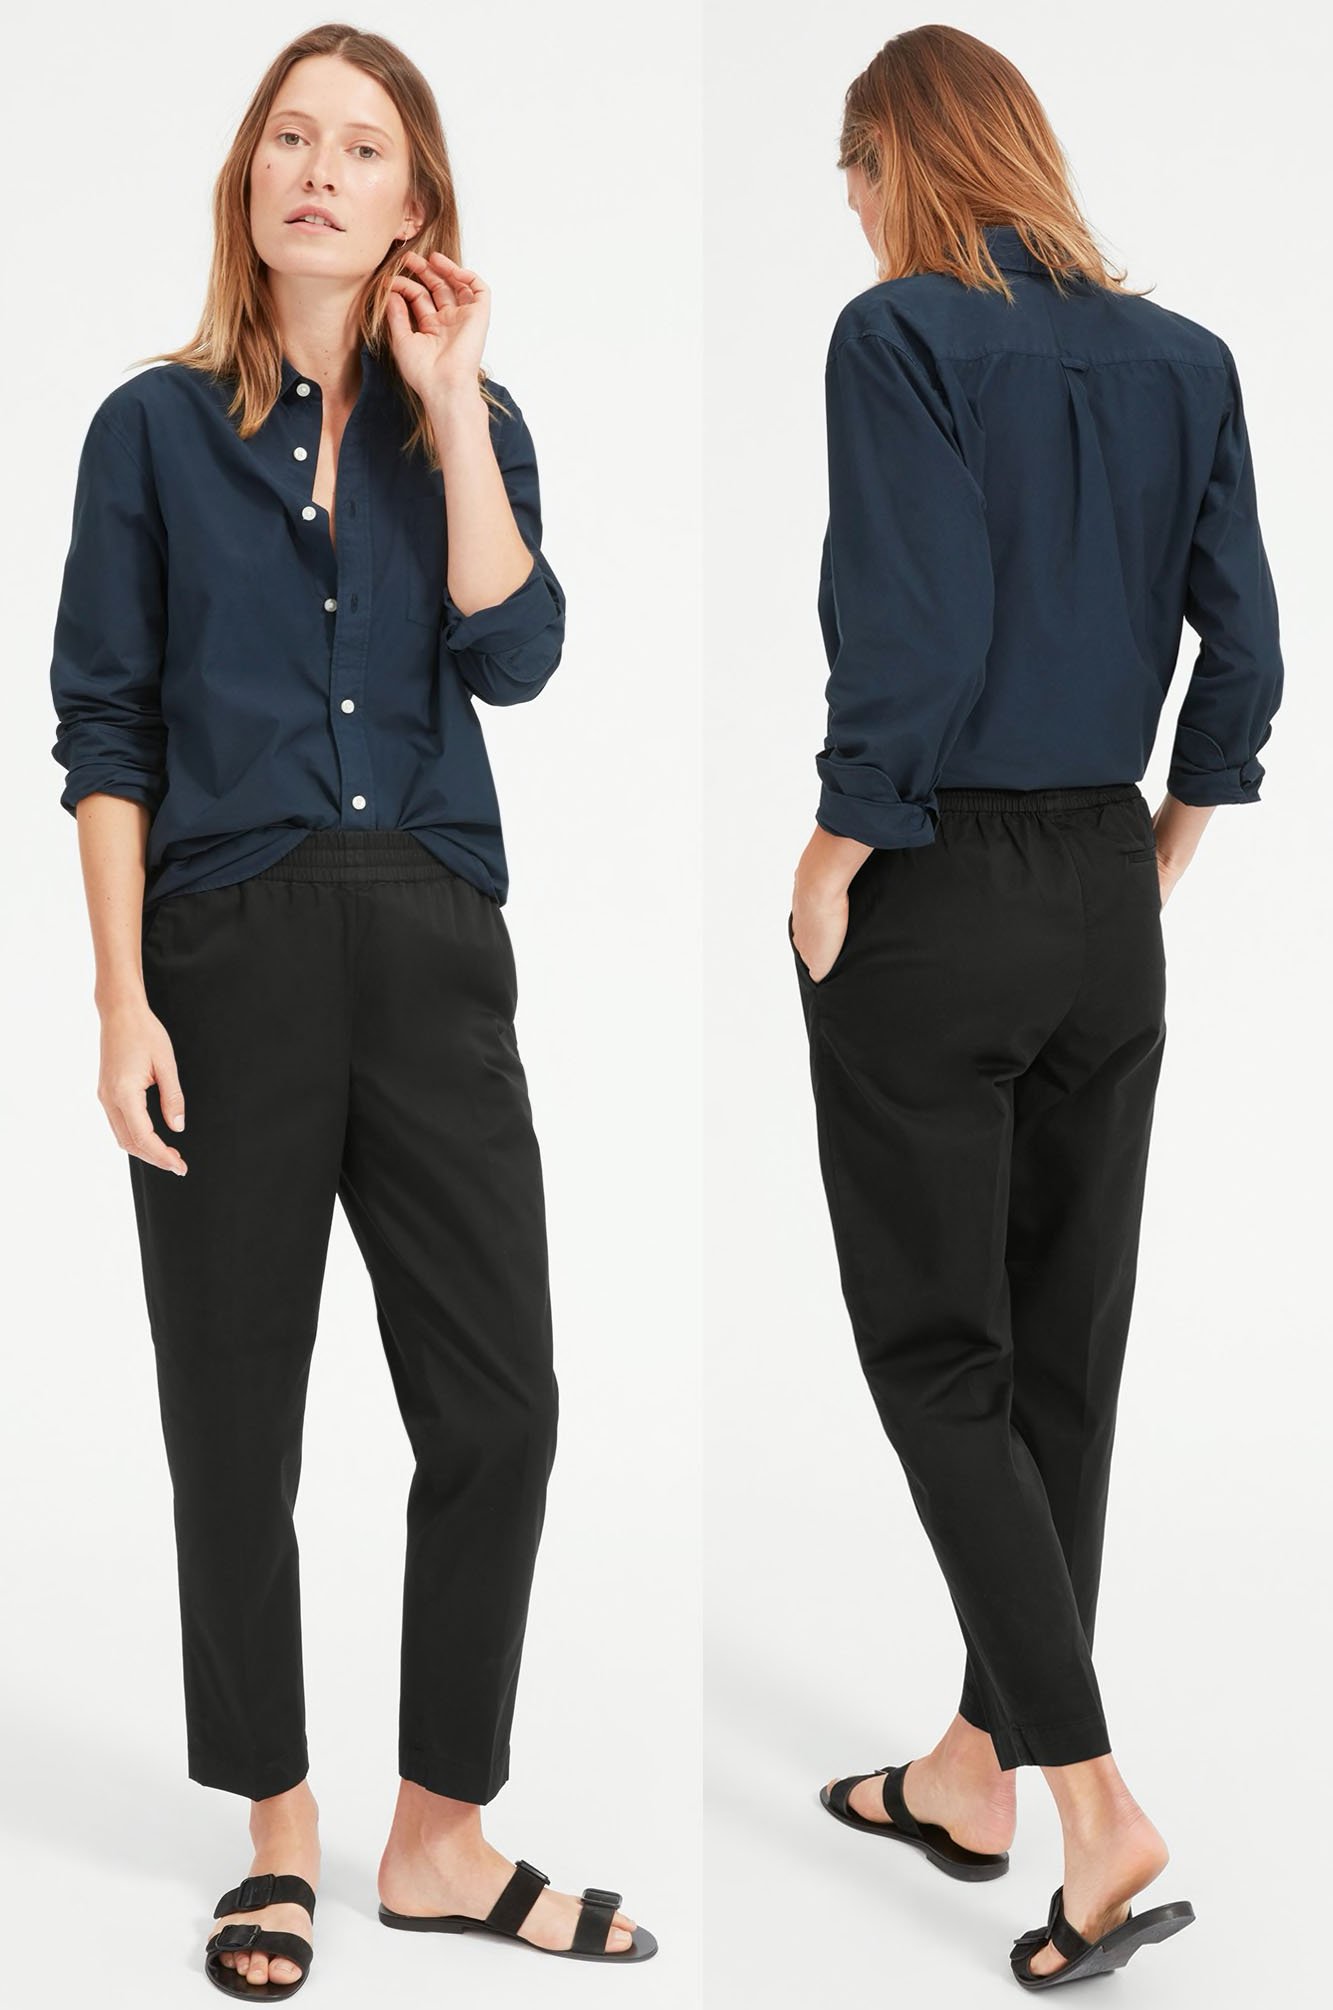 9 Best Stores To Buy Women's Work Clothes and Stylish Office Clothing